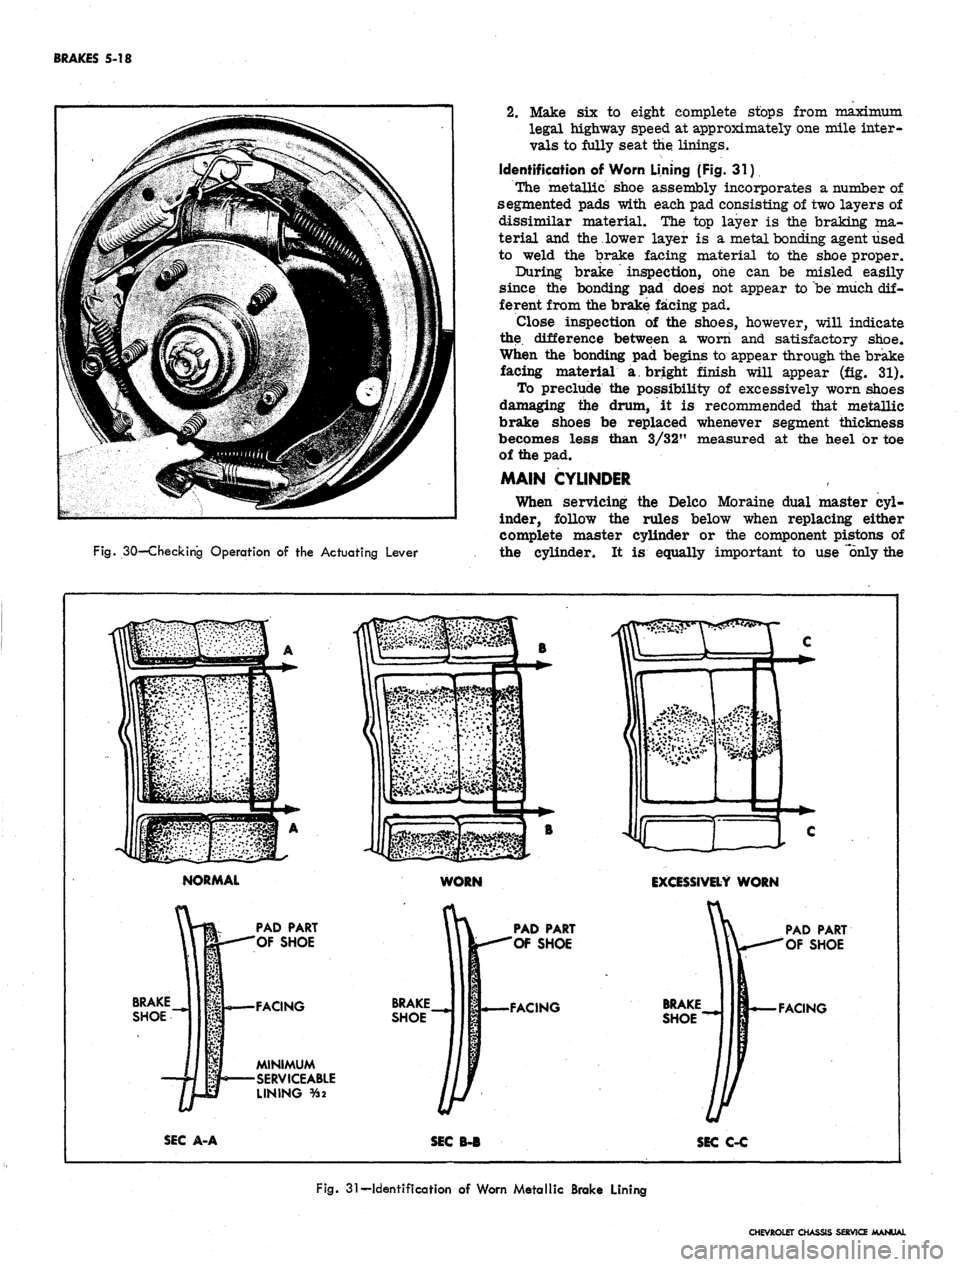 CHEVROLET CAMARO 1967 1.G Chassis Workshop Manual 
BRAKES
 5-18

Fig.
 30—Checking
 Operation
 of the
 Actuating
 Lever 
2.
 Make six to eight complete stops from maximum

legal highway speed at approximately one mile inter-

vals to fully seat the